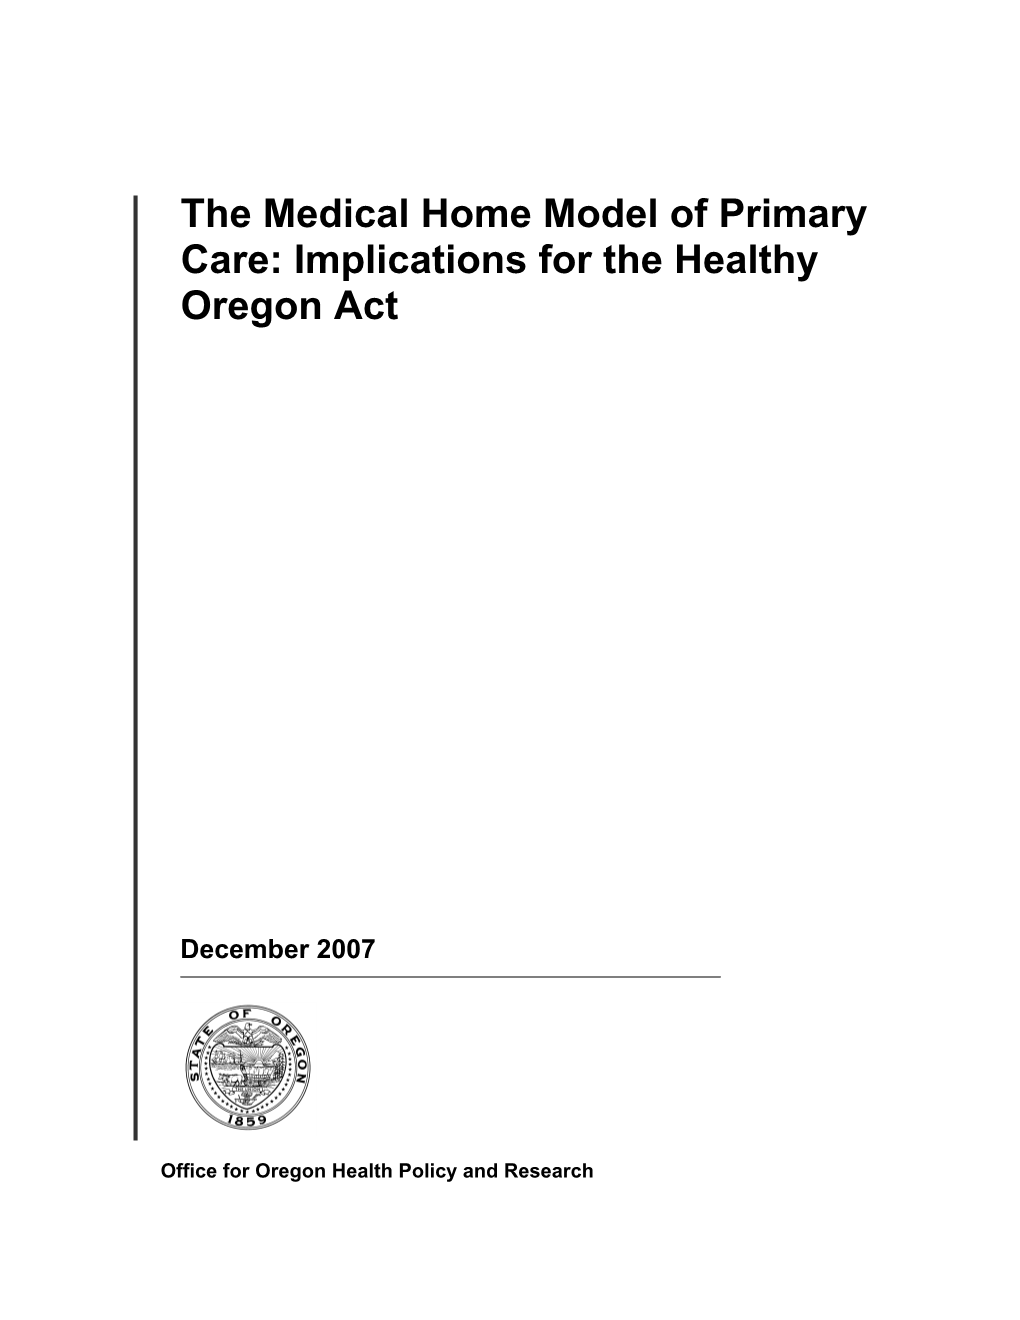 The Medical Home Model of Primary Care: Implications for the Healthy Oregon Act